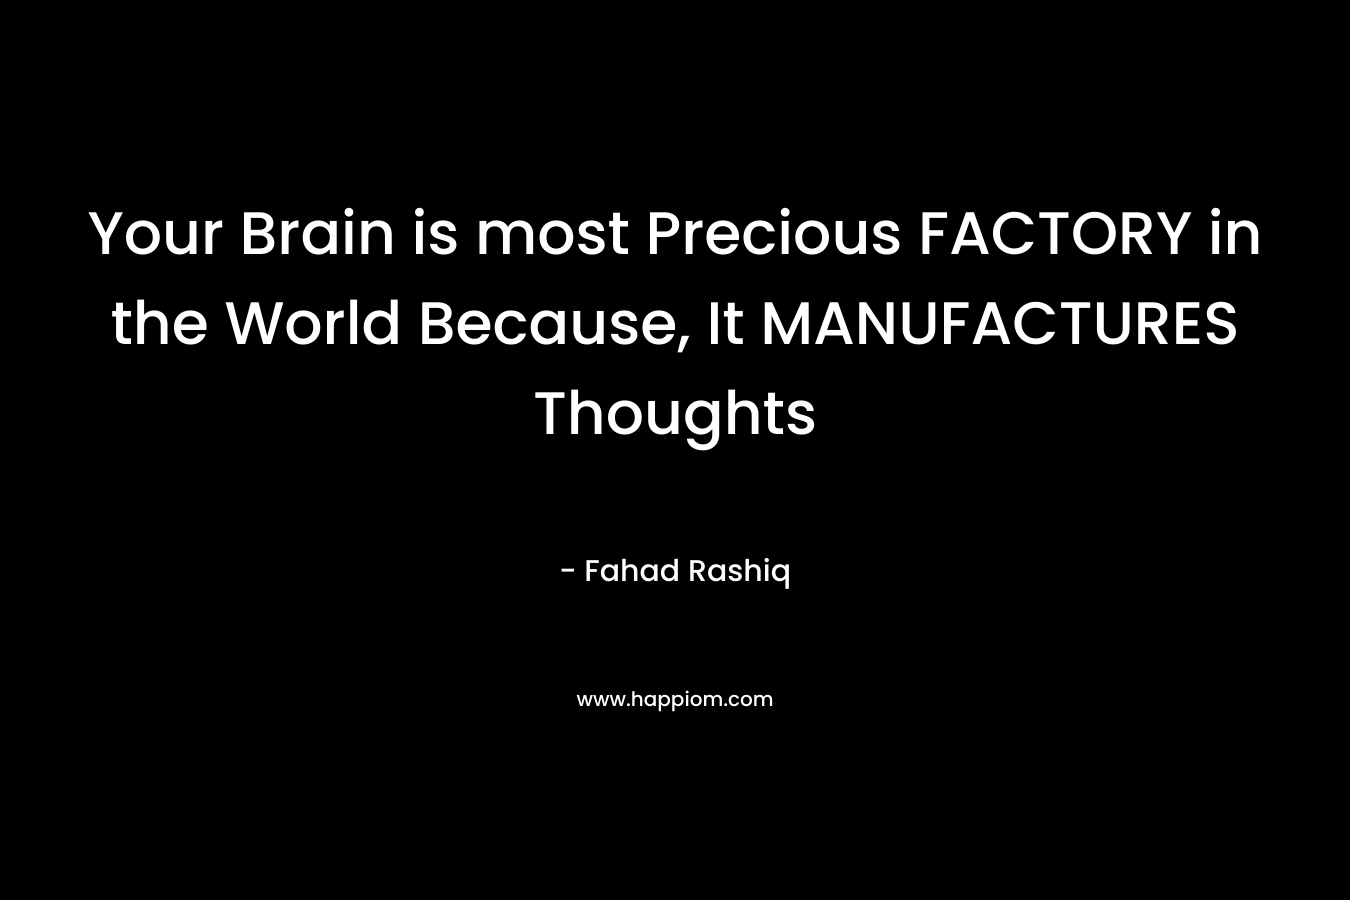 Your Brain is most Precious FACTORY in the World Because, It MANUFACTURES Thoughts